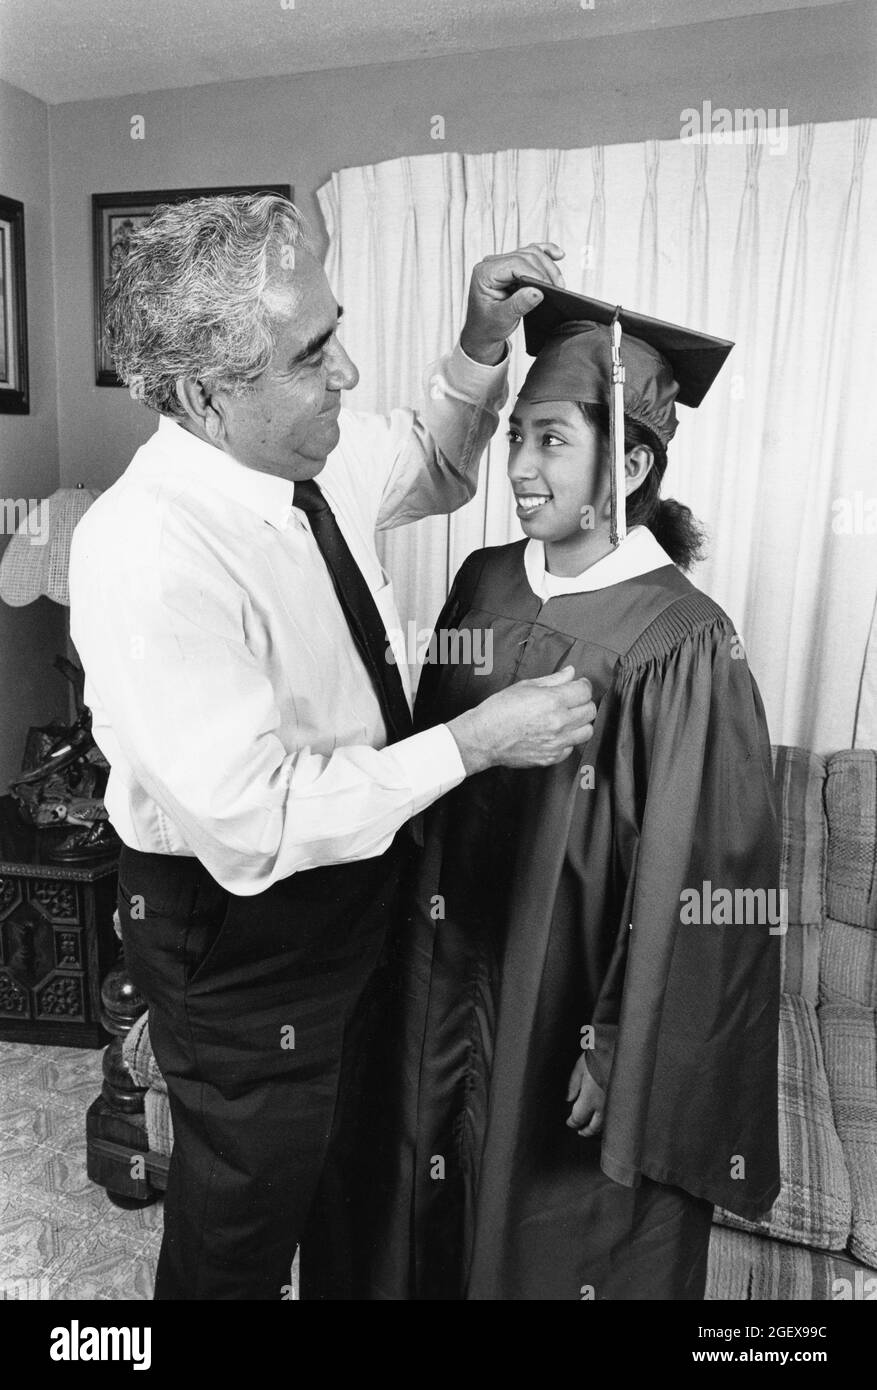 San Antonio Texas USA, circa 1990: Proud father adjusts daughter's mortarboard at home before her commencement ceremony from Edgewood High School. Her father, Demetrio Rodriguez, is the named plaintiff in Rodriguez v. San Antonio Independent School District, which led to the landmark Edgewood v. Kirby lawsuit that forced the state of Texas to make its funding of public schools more equitable between districts serving rich and white students and those serving poor and minority students.  MR ES-0122 Model Released  ©Bob Daemmrich Stock Photo